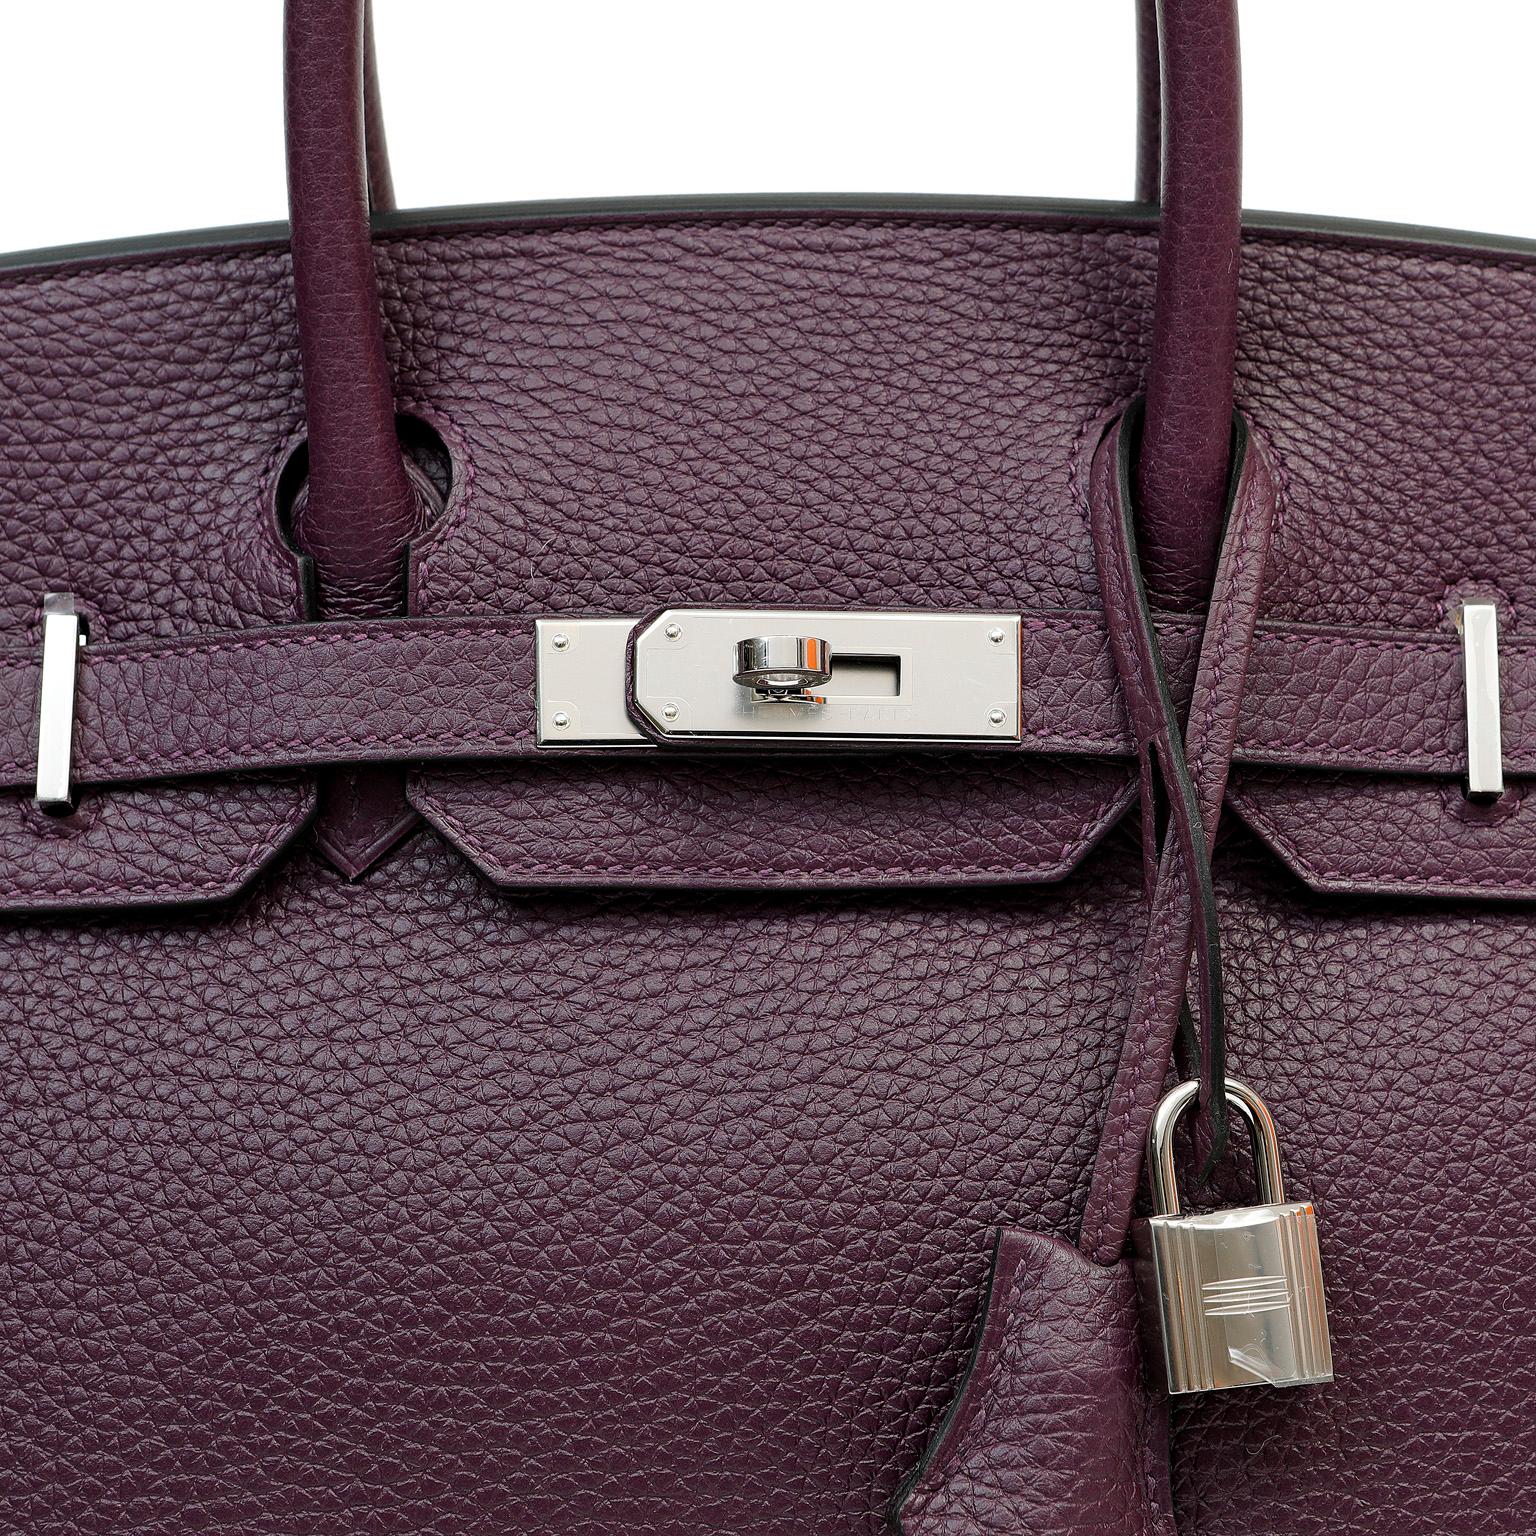 This authentic Hermès Aubergine Togo Leather 30 cm Birkin Bag is in pristine unworn condition.  A brand new deep purple color from 2022, this piece has the plastic on all the hardware and is exquisite.

Togo is scratch resistant calf leather; it is